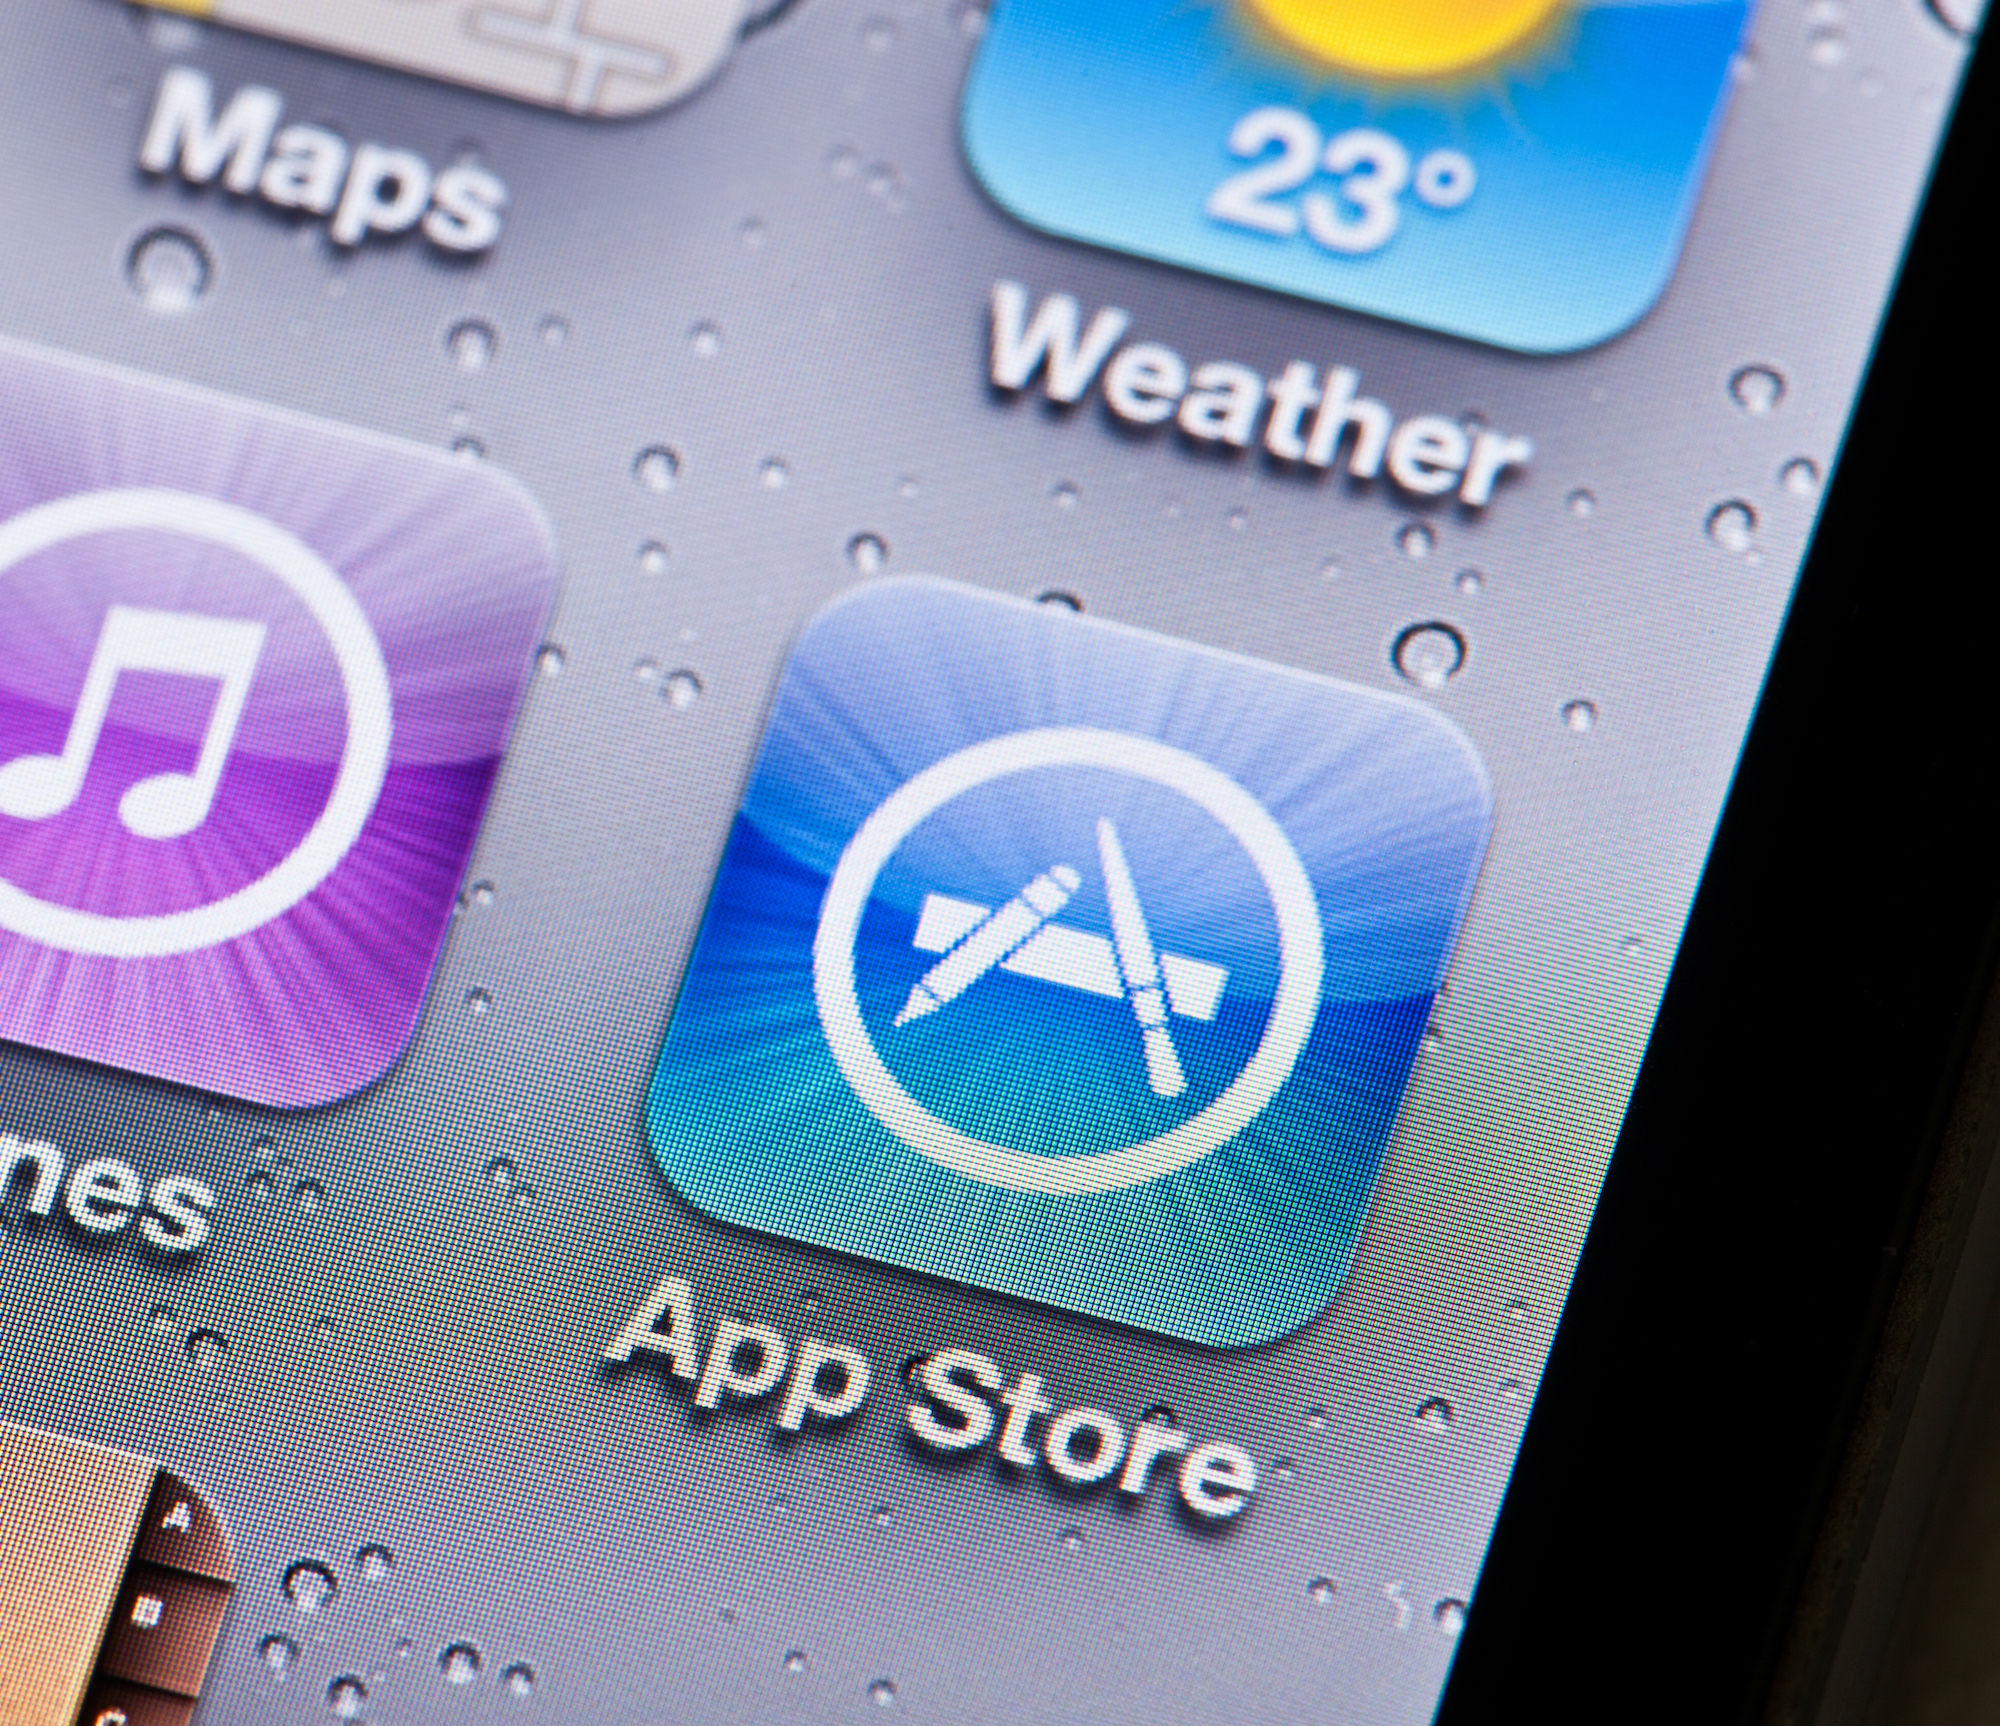 App Store Optimization: Take Your Game to the Next Level - Blog Mobile